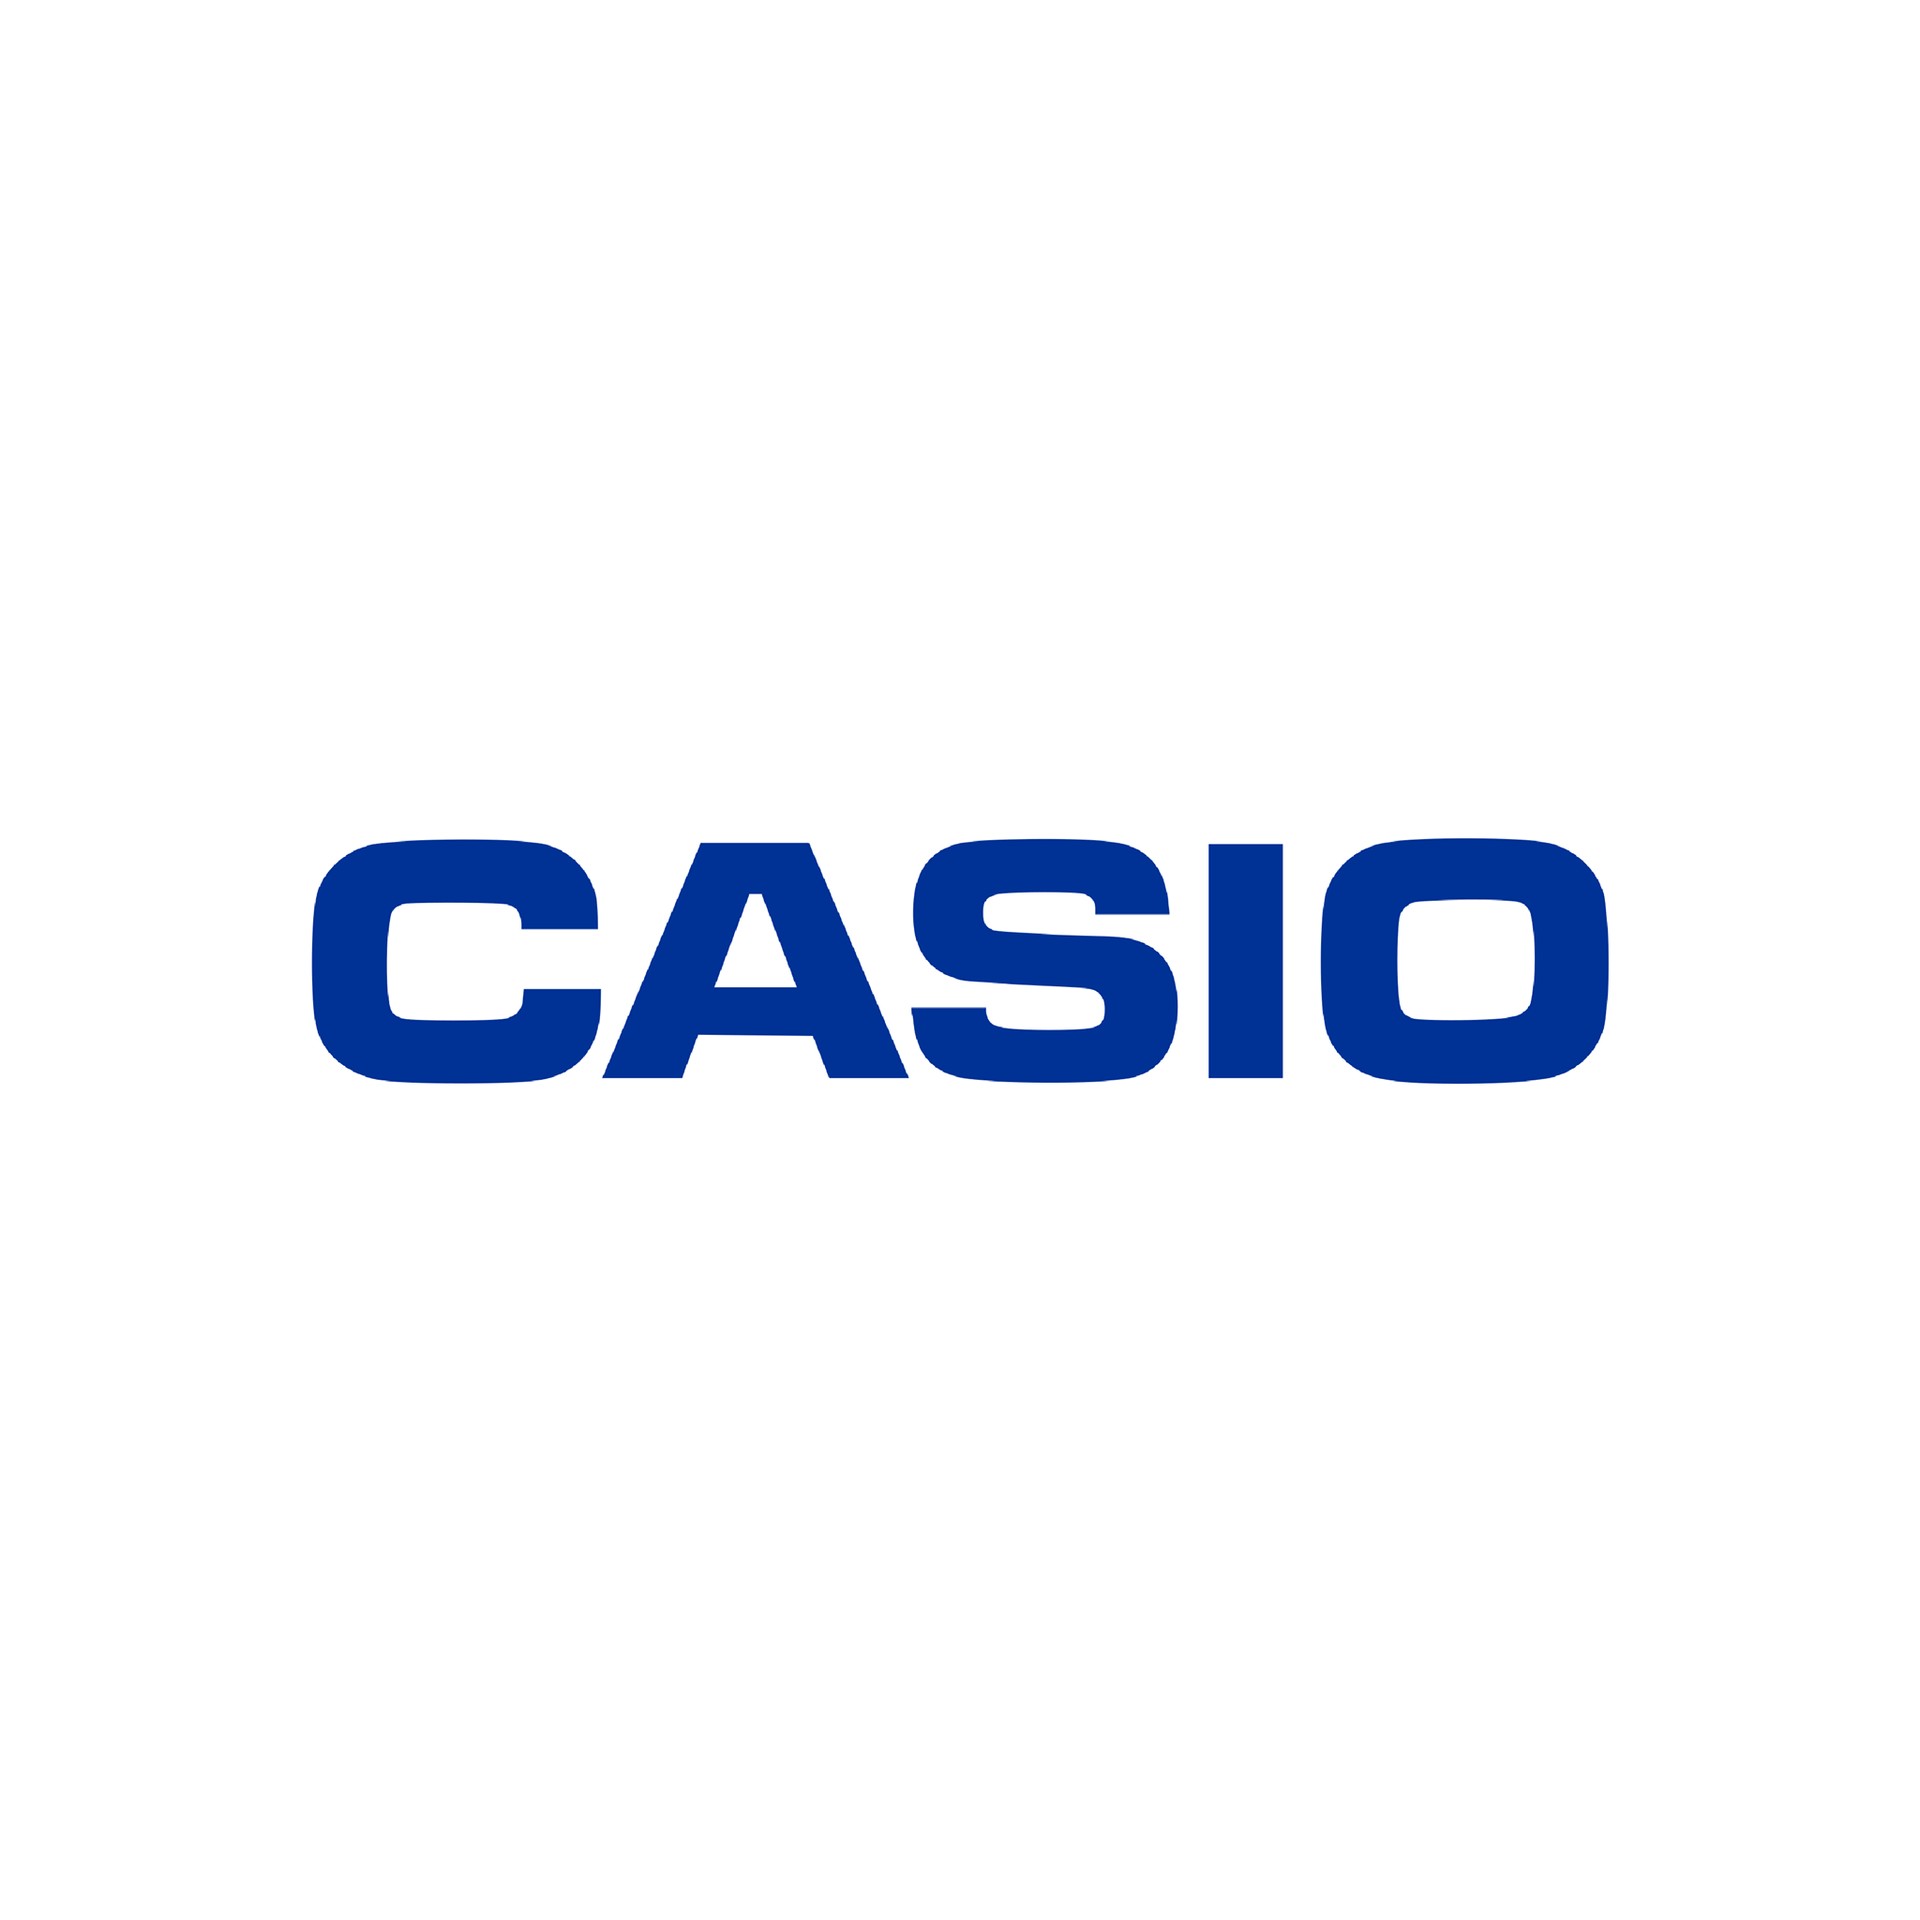 Casio Middle East and Africa FZE